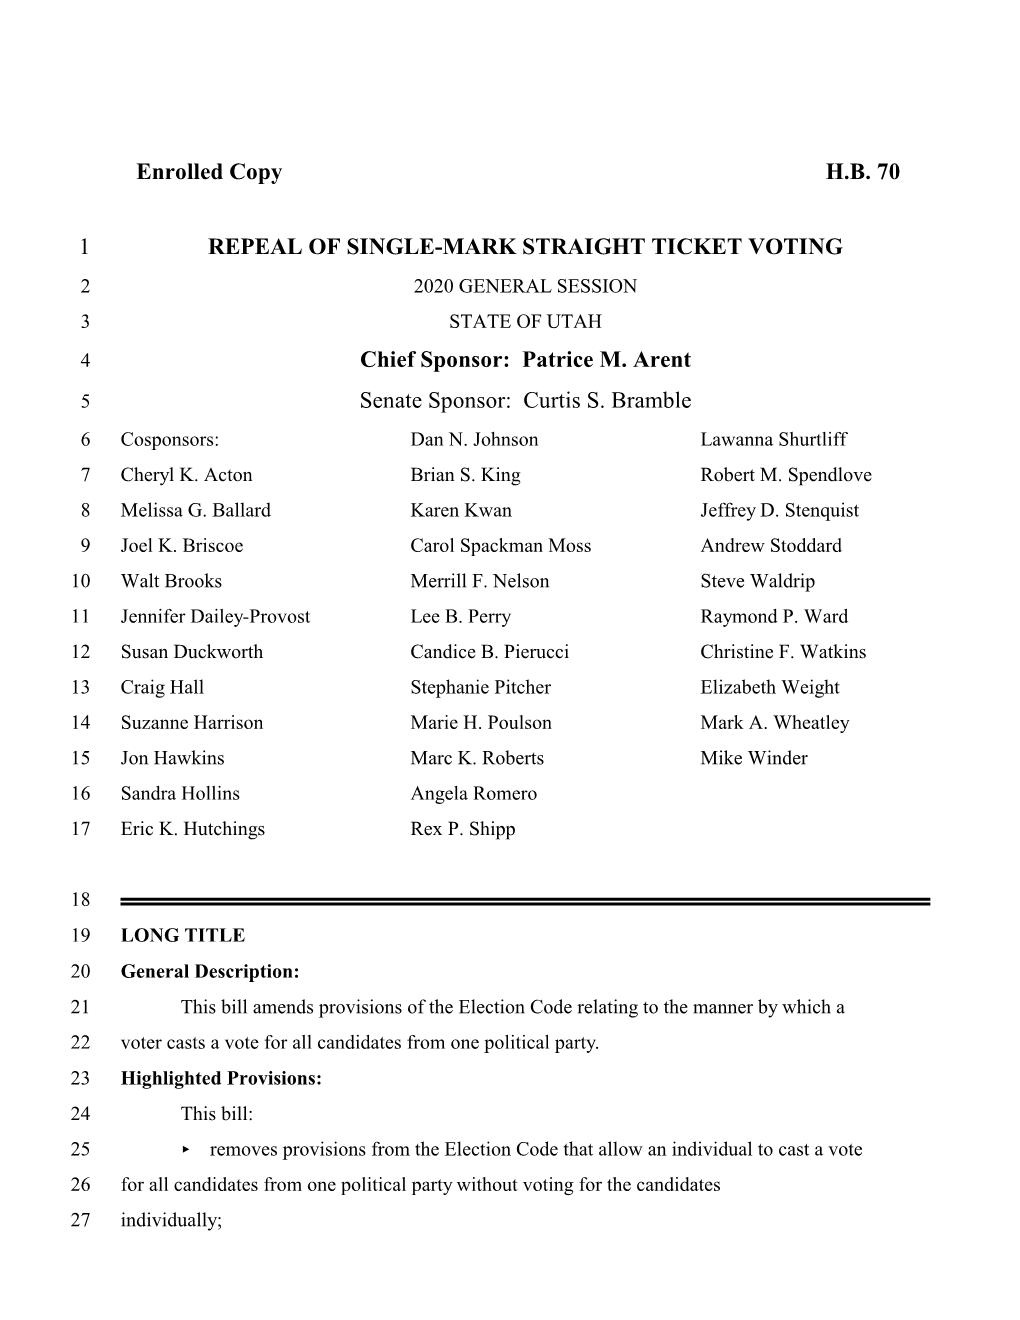 Enrolled Copy HB 70 1 REPEAL of SINGLE-MARK